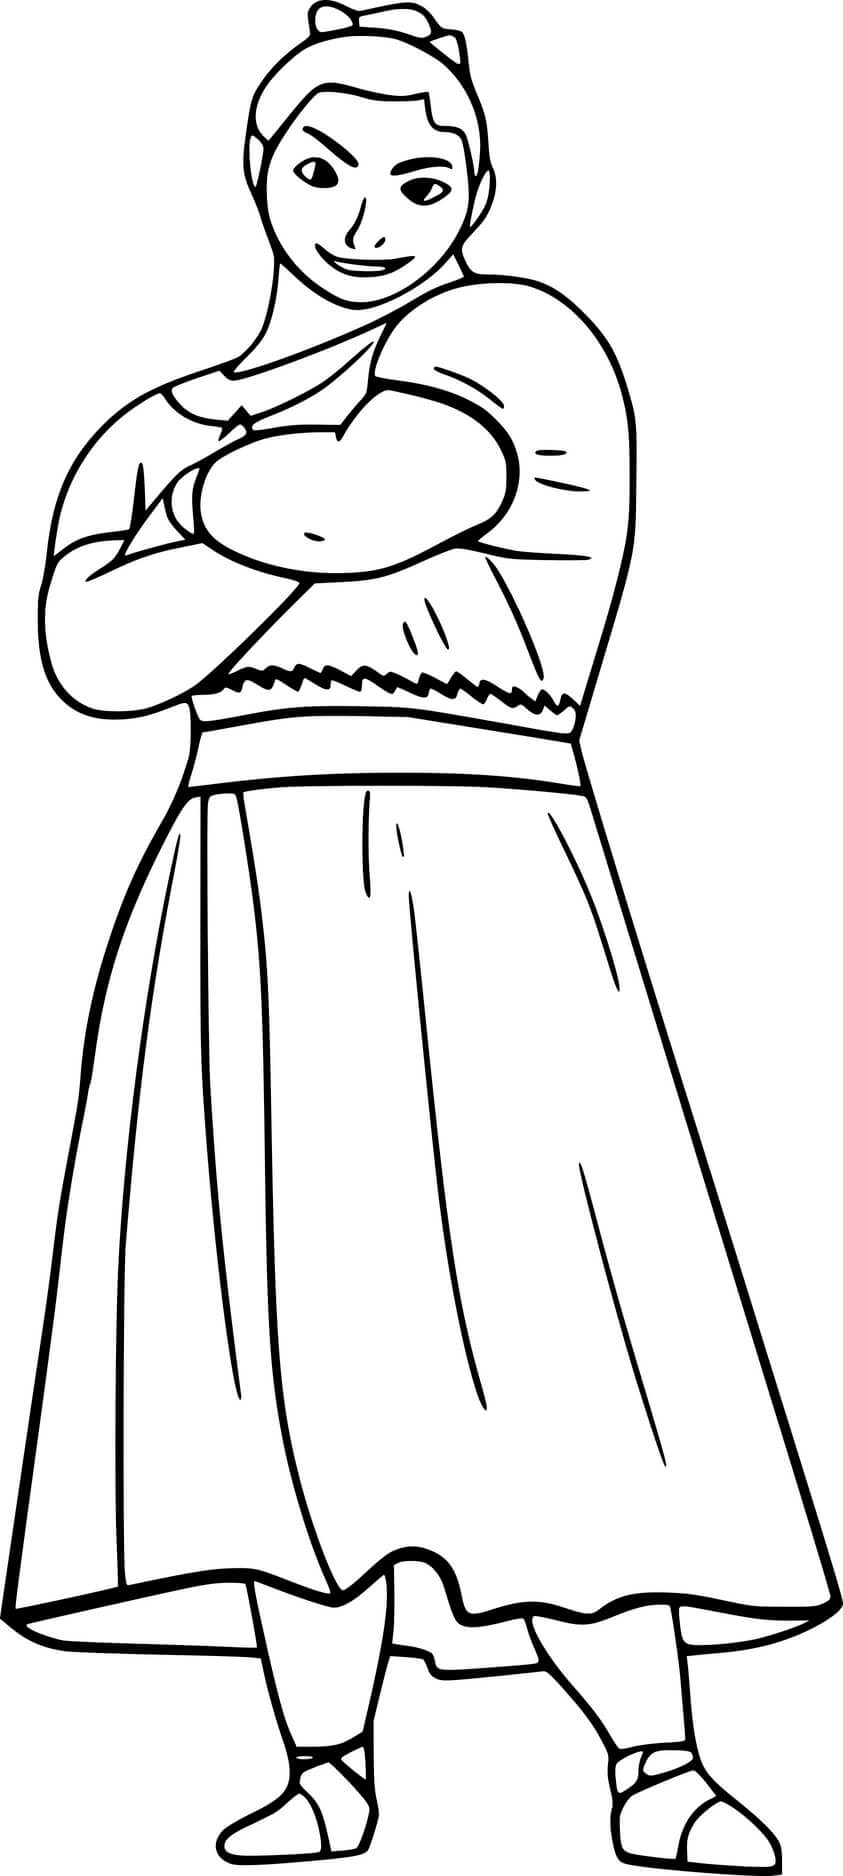 Luisa Madrigal Coloring Page